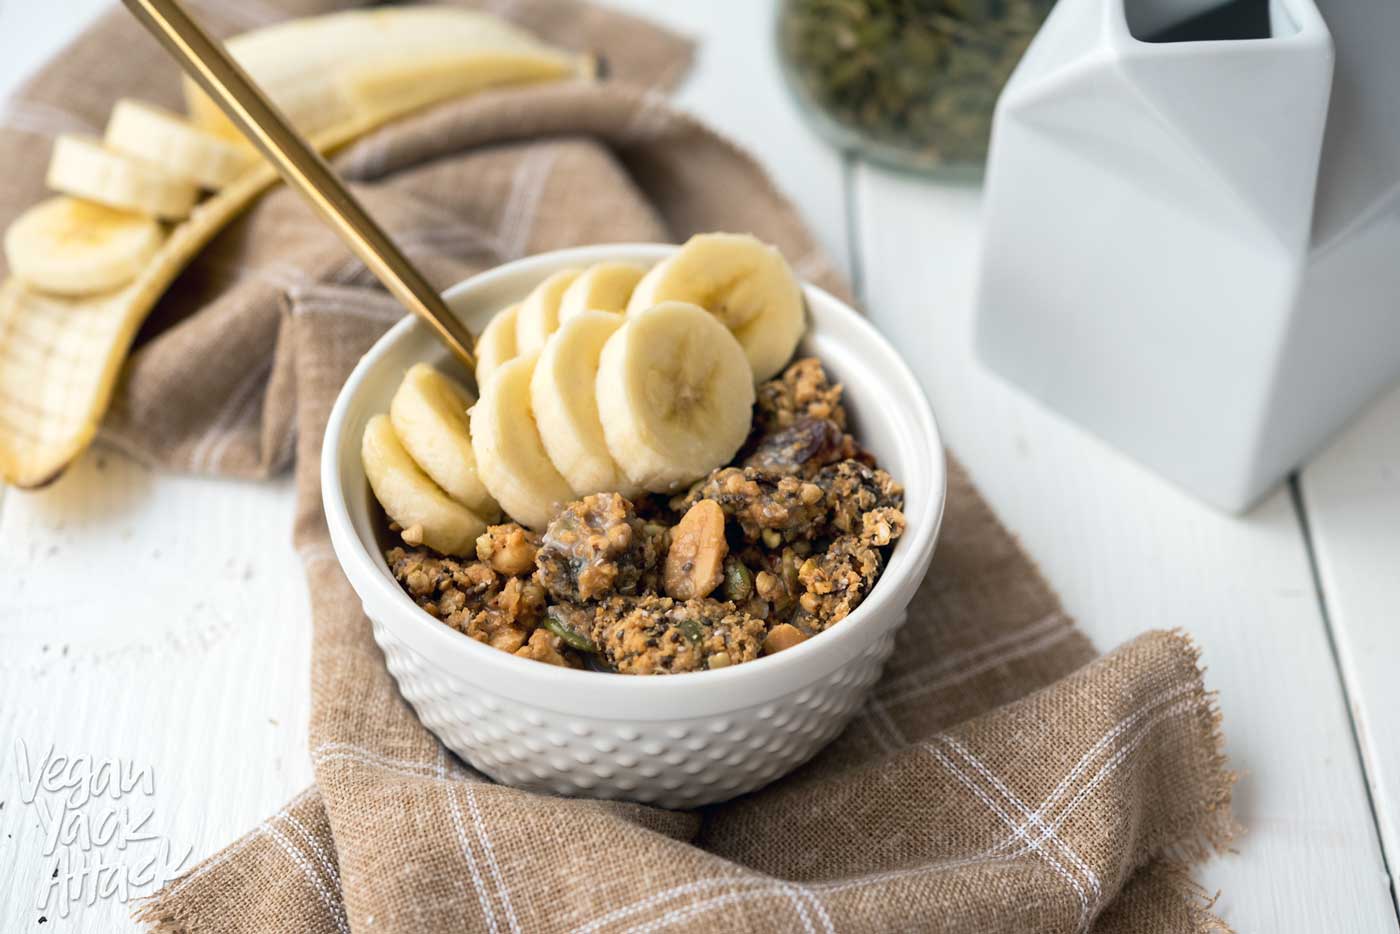 This snack is anything but boring! PB&J Buckwheat Granola, that's oil-free and gluten-free. Plus, it's a great way to empty out some of your pantry! #vegan #glutenfree #oilfree